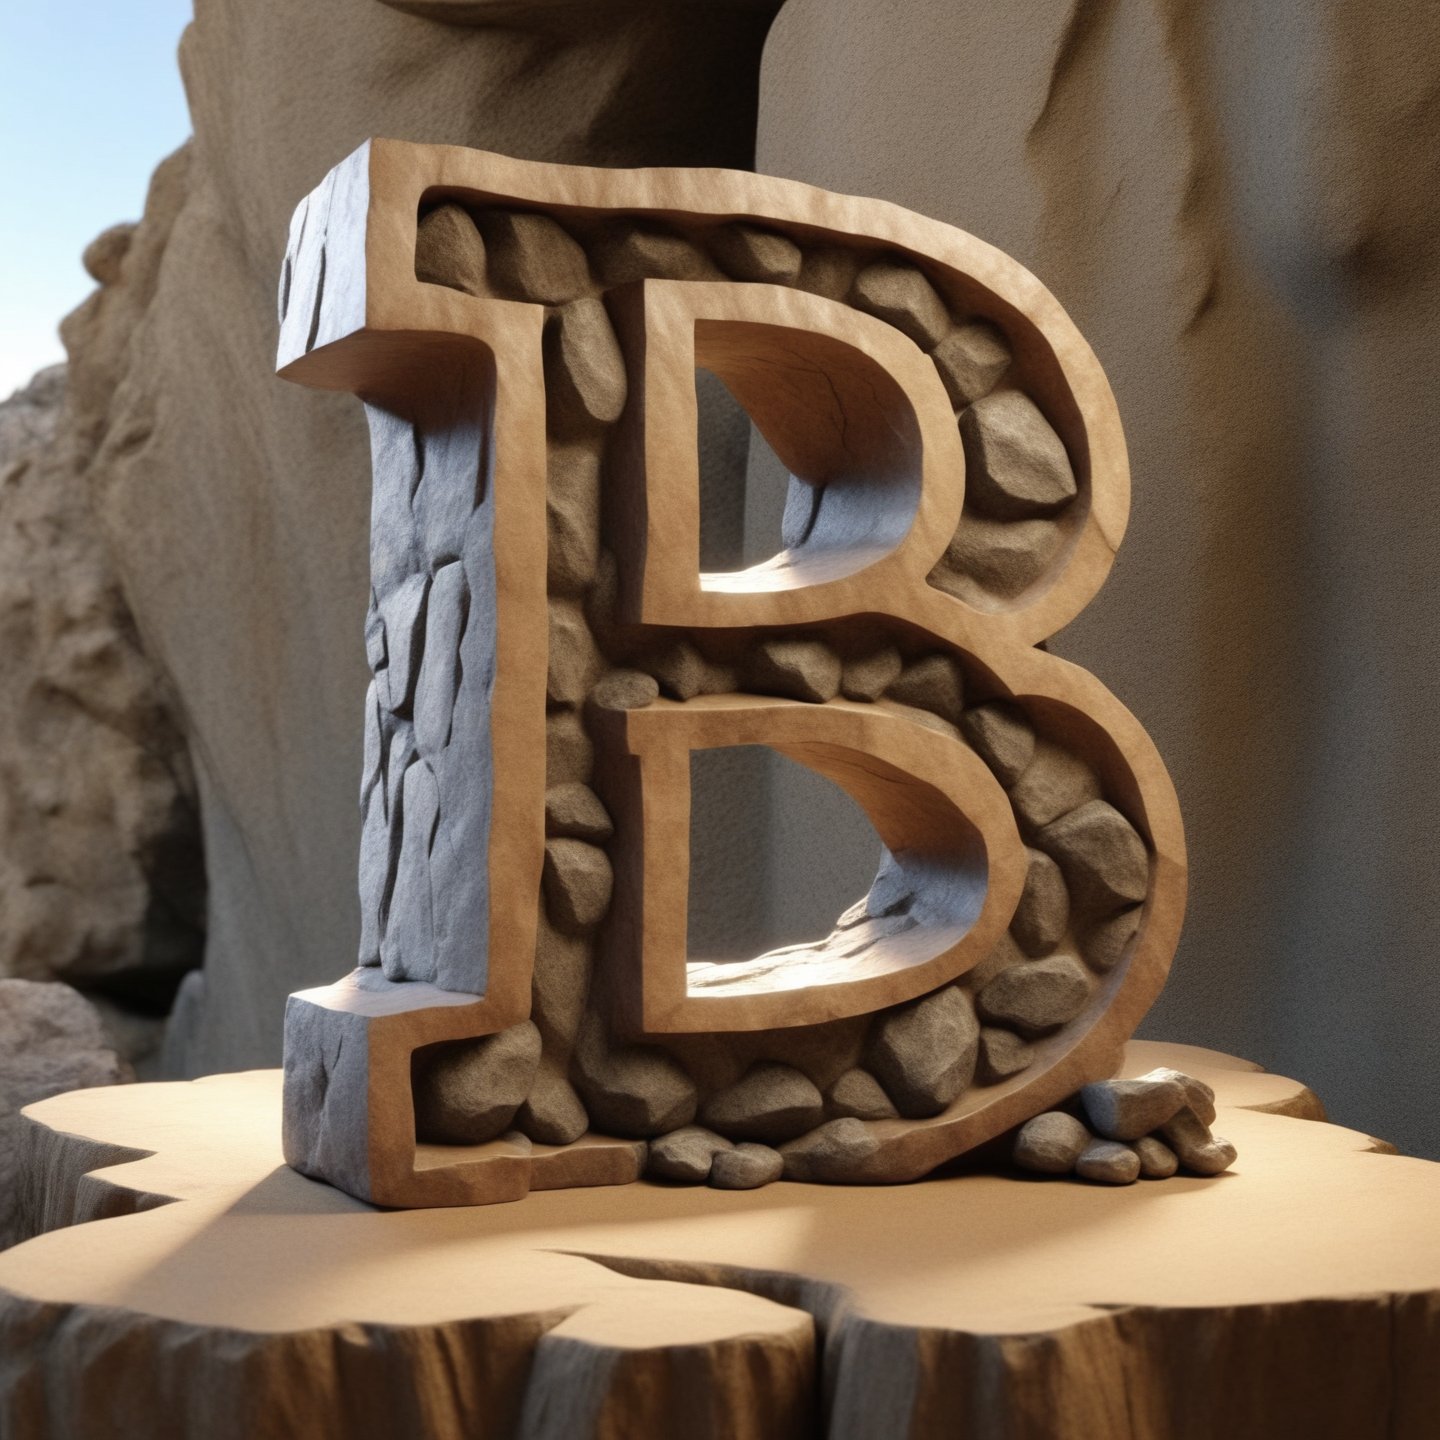 single rustic and robust capital letter B ornament carved into the rock at small rocks foormat,  in vertical position,  over single clear wood table, all bords  soft curved, no acute corners